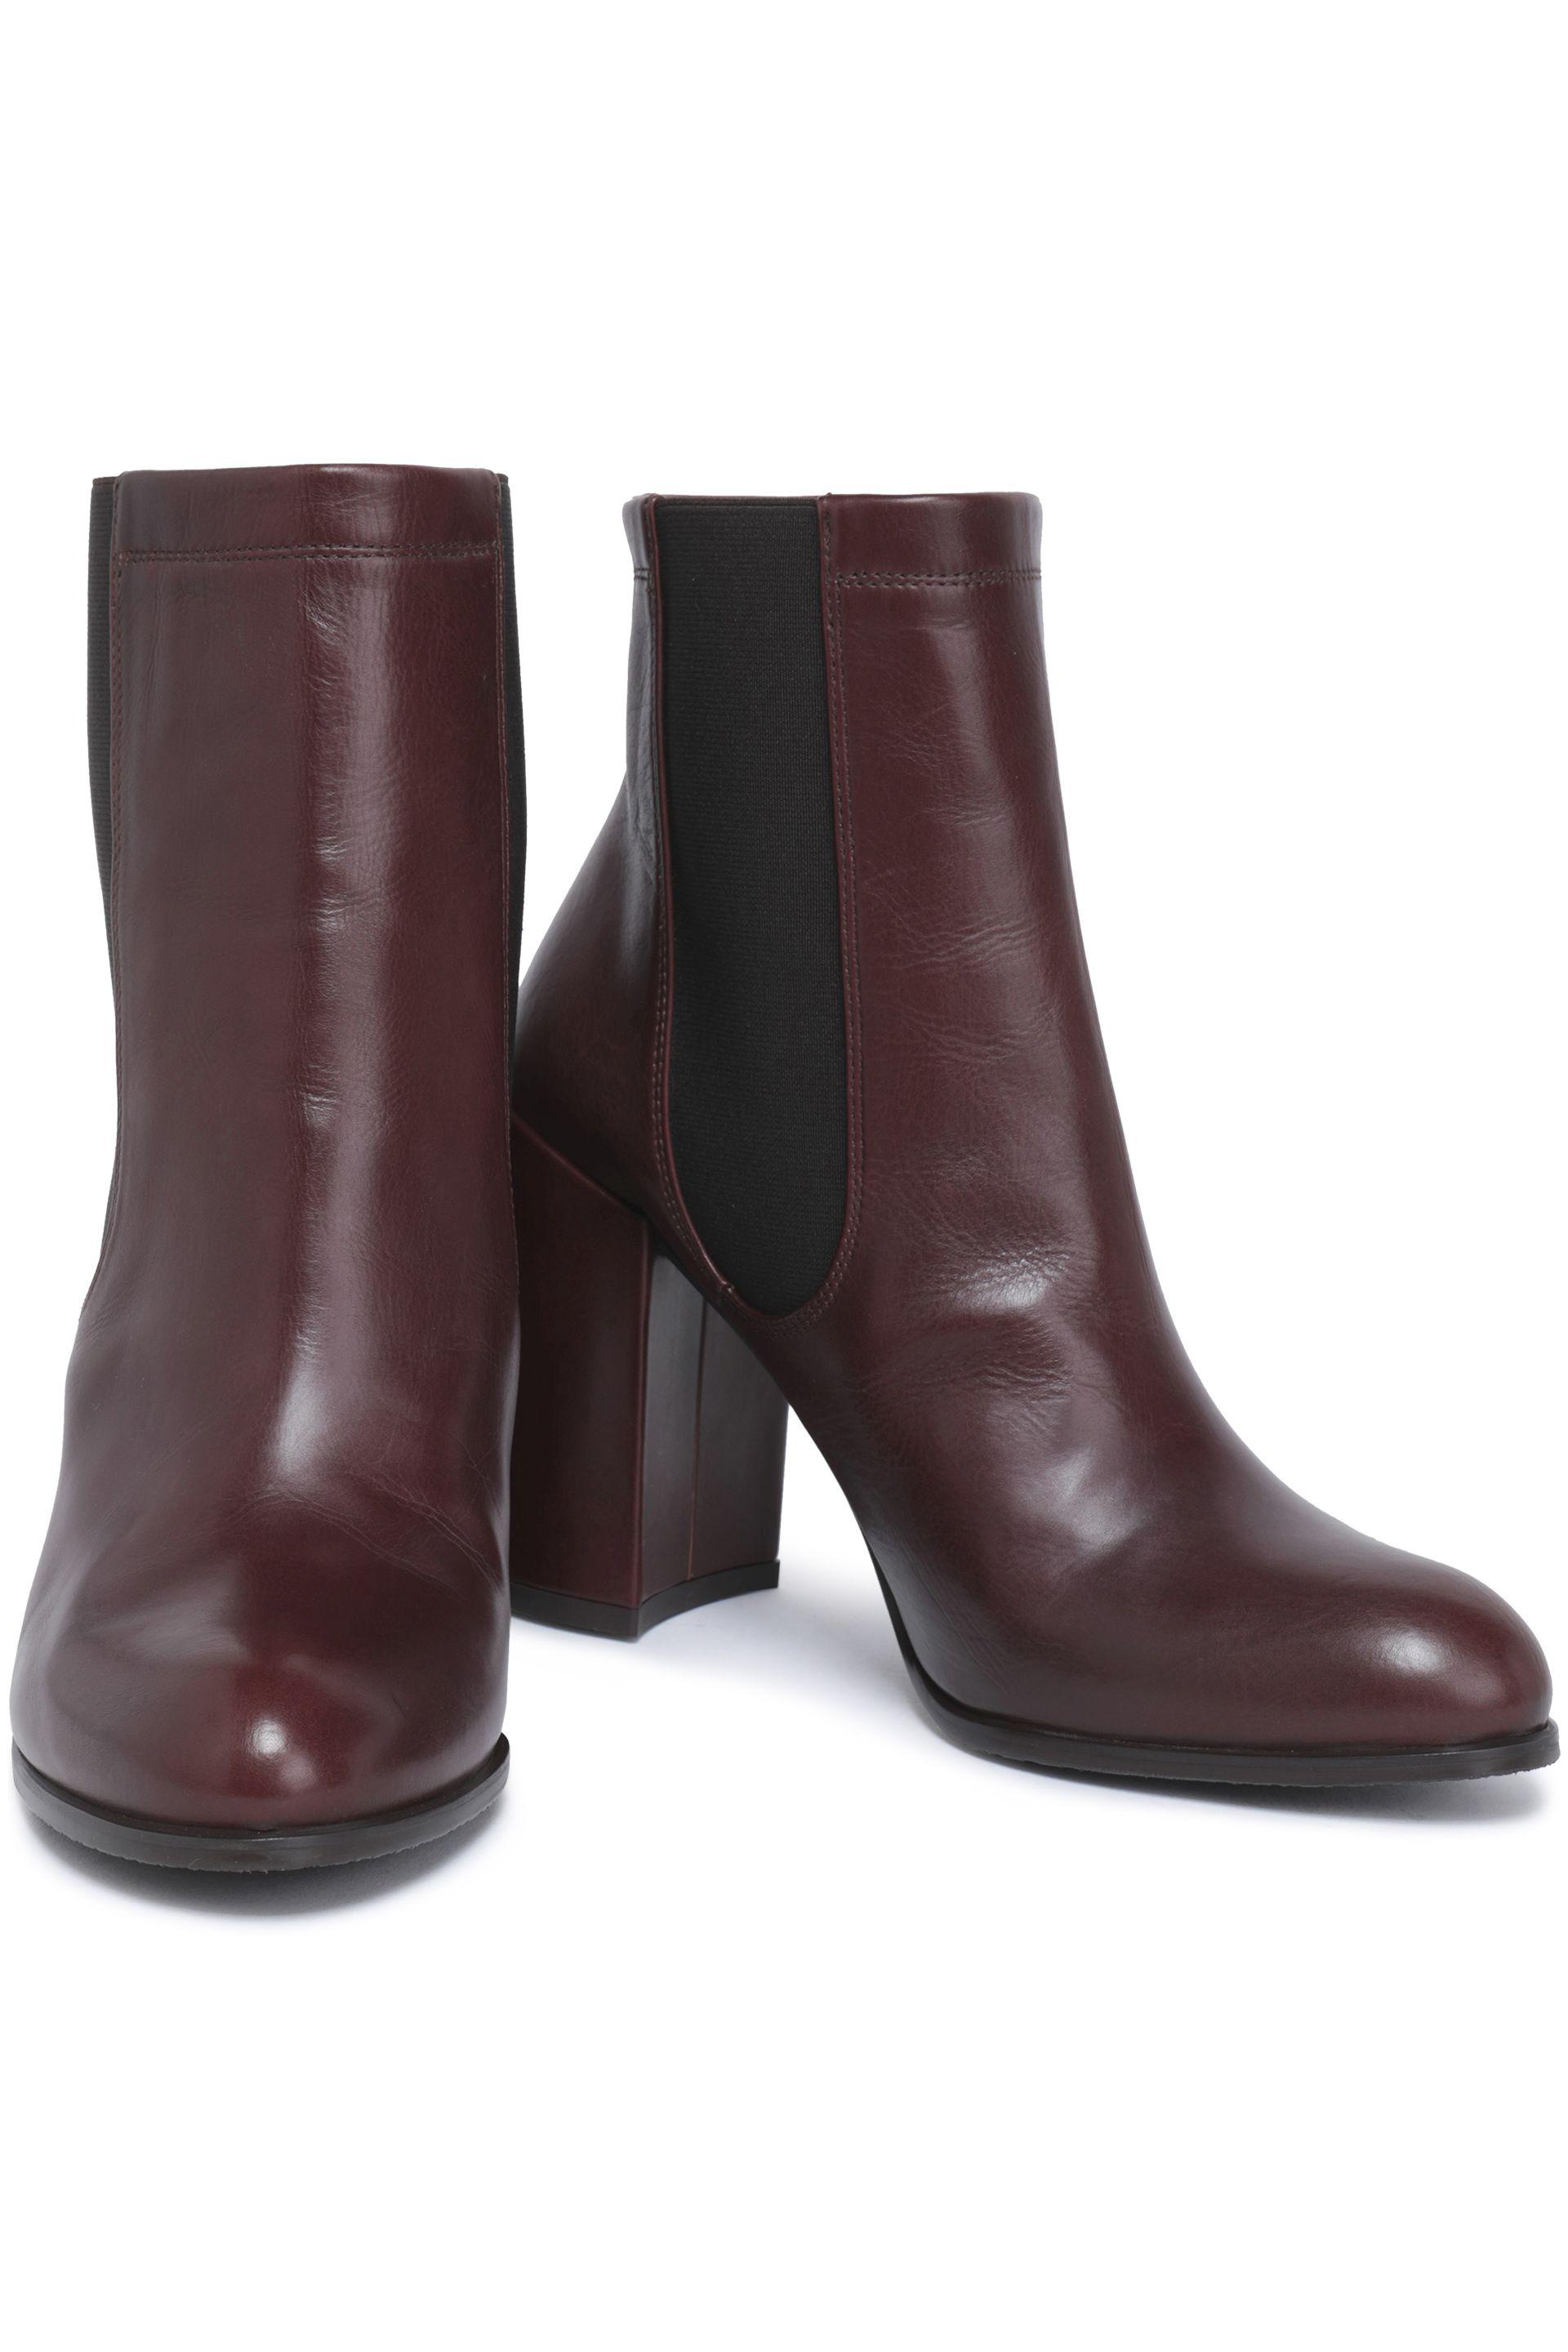 Stuart Weitzman Leather Ankle Boots Chocolate in Brown - Lyst